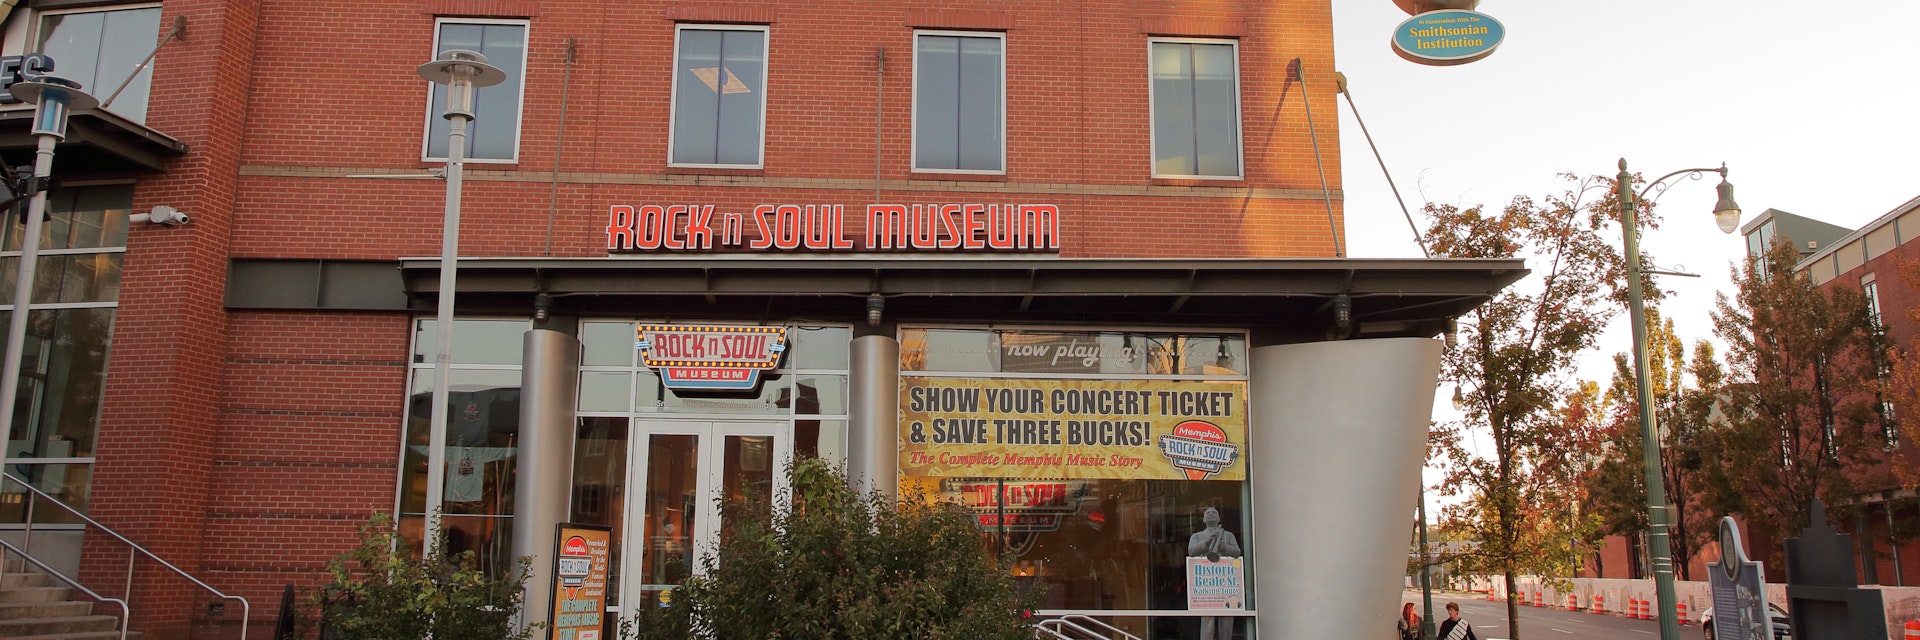 Entrance to the Memphis Rock n Soul Museum.  The museum is located next to the FedEx forum near Beale Street - Memphis, Tennessee, USA - October 13, 2019; Shutterstock ID 1535939477; full: 65050; gl: Online editorial; netsuite: POI updates; your: Ann Douglas Lott
1535939477